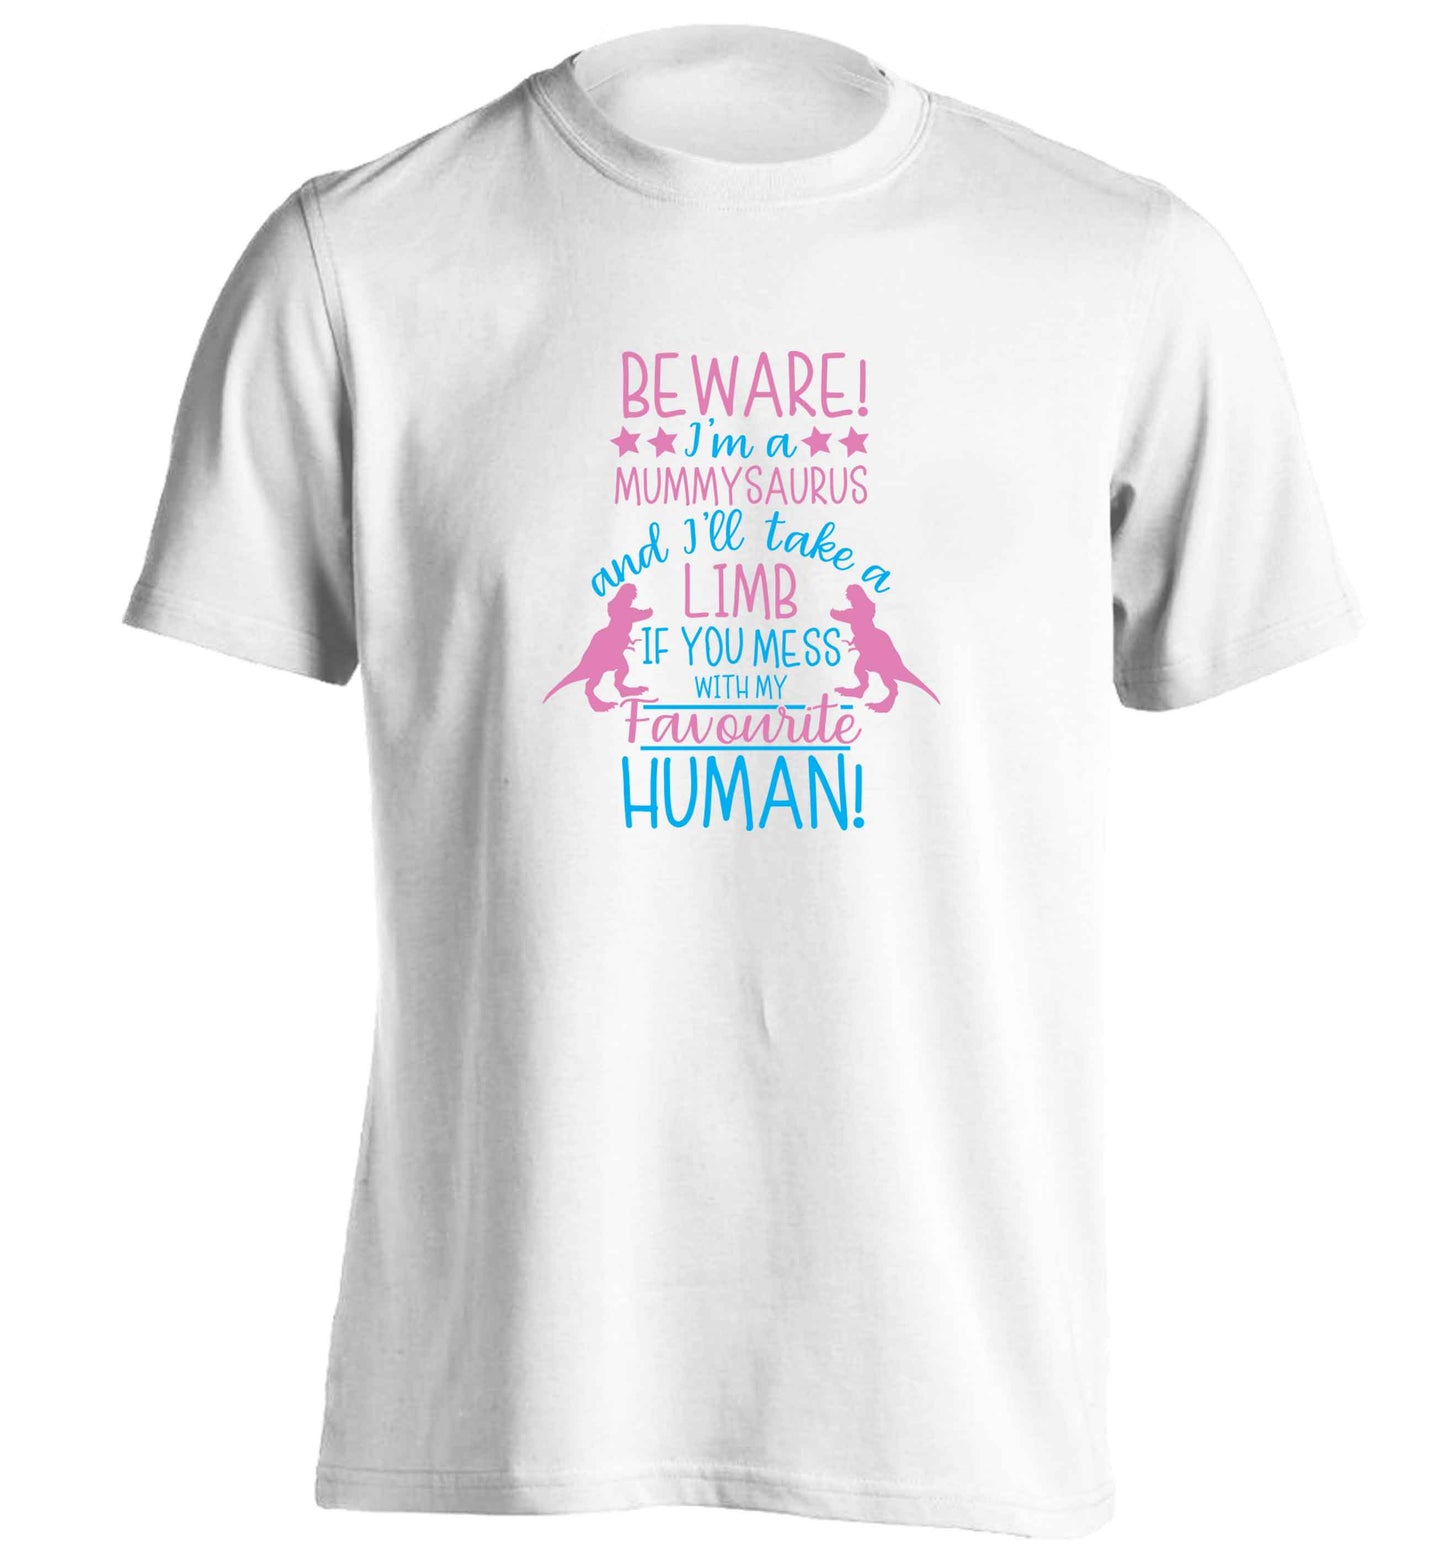 Perfect gift for any protective mummysaurus! Beware I'm a mummysaurus and I'll take a limb if you mess with my favourite human adults unisex white Tshirt 2XL